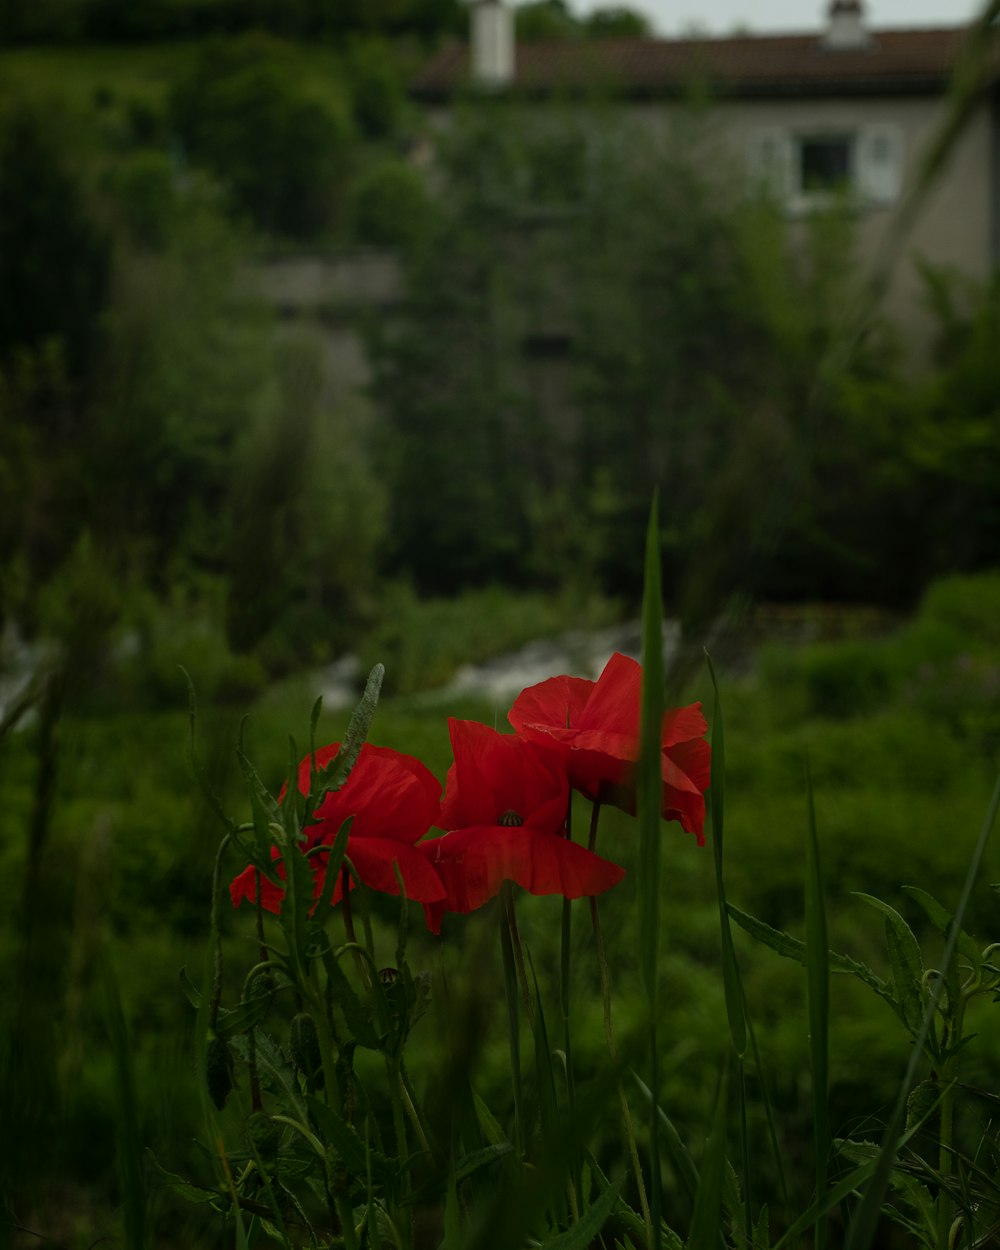 a red flower in a grassy field with a house in the background